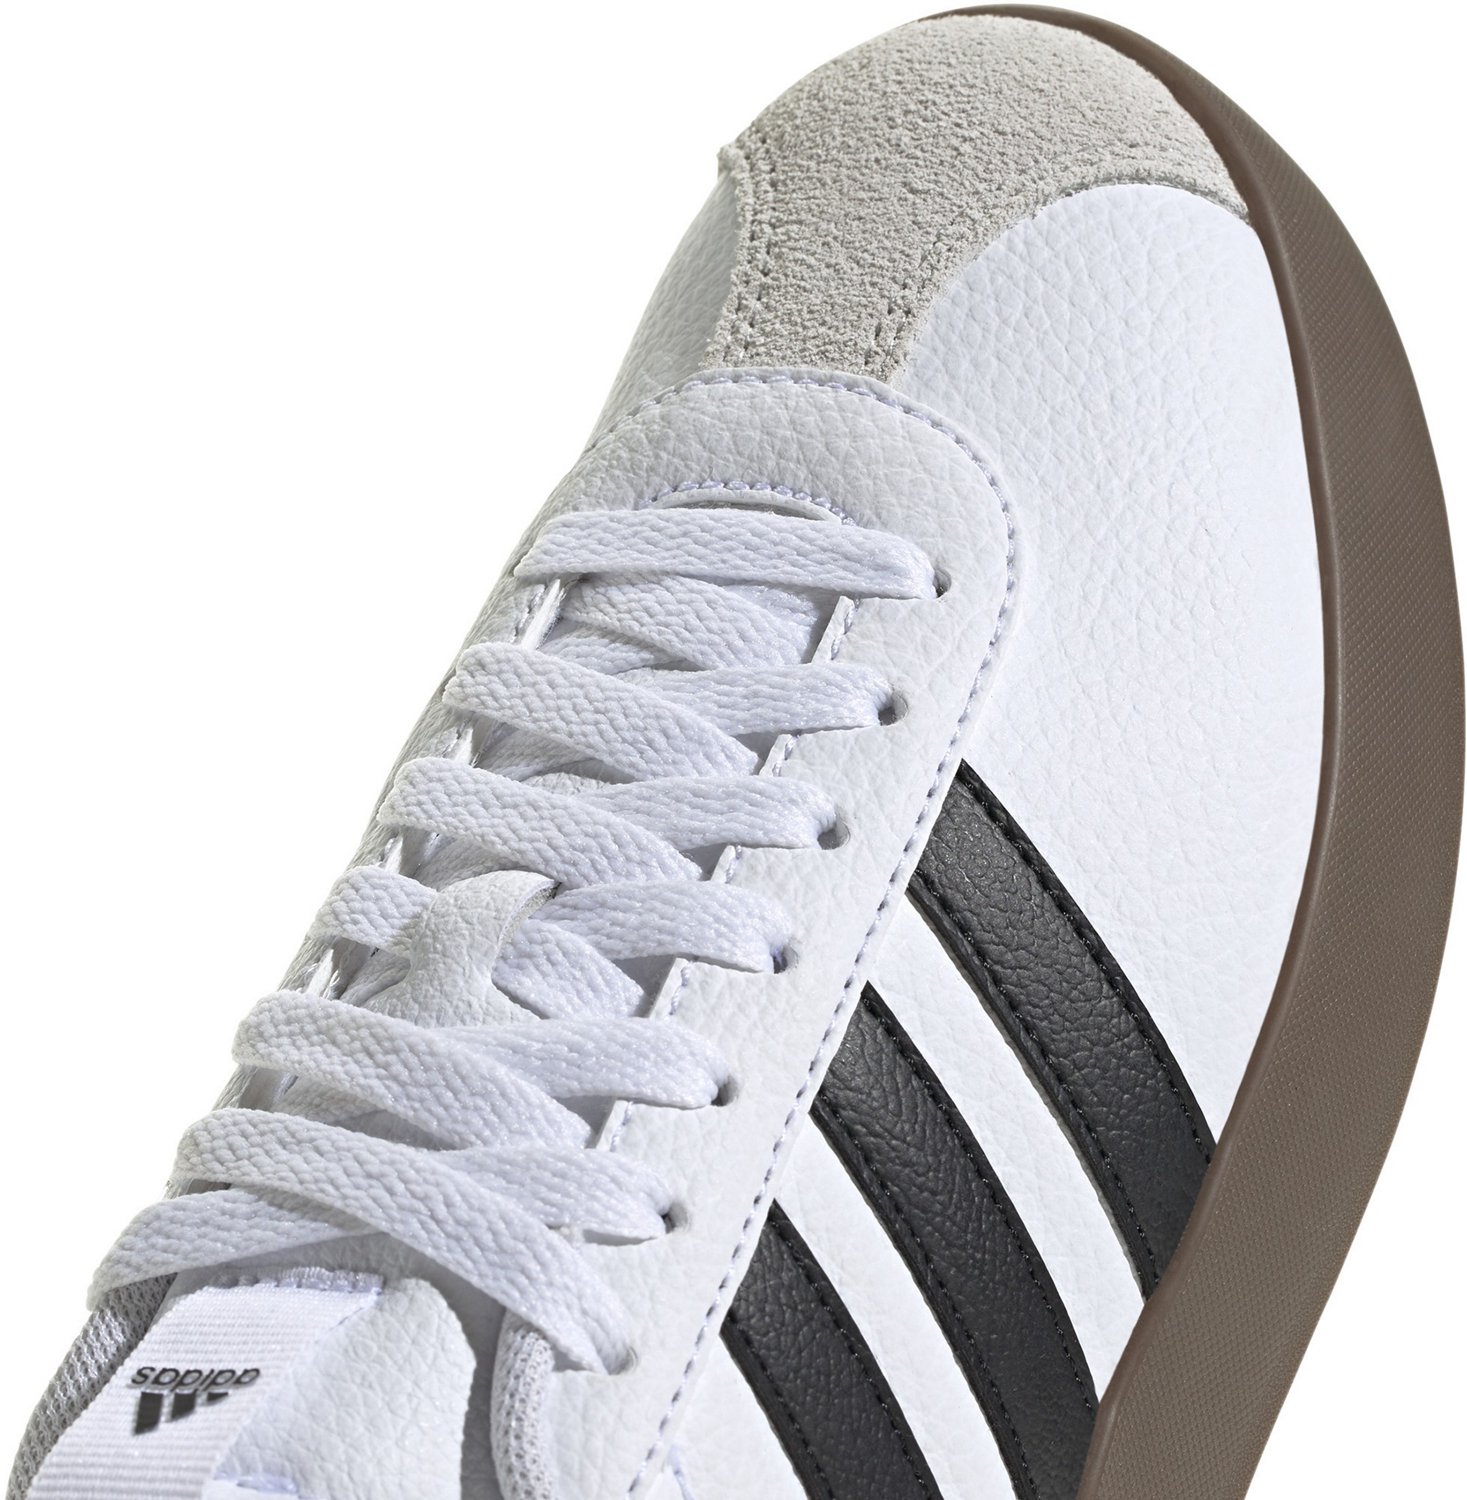 Adidas VL Court 3.0 Women's Shoes Sneakers Casual Skate Trainer